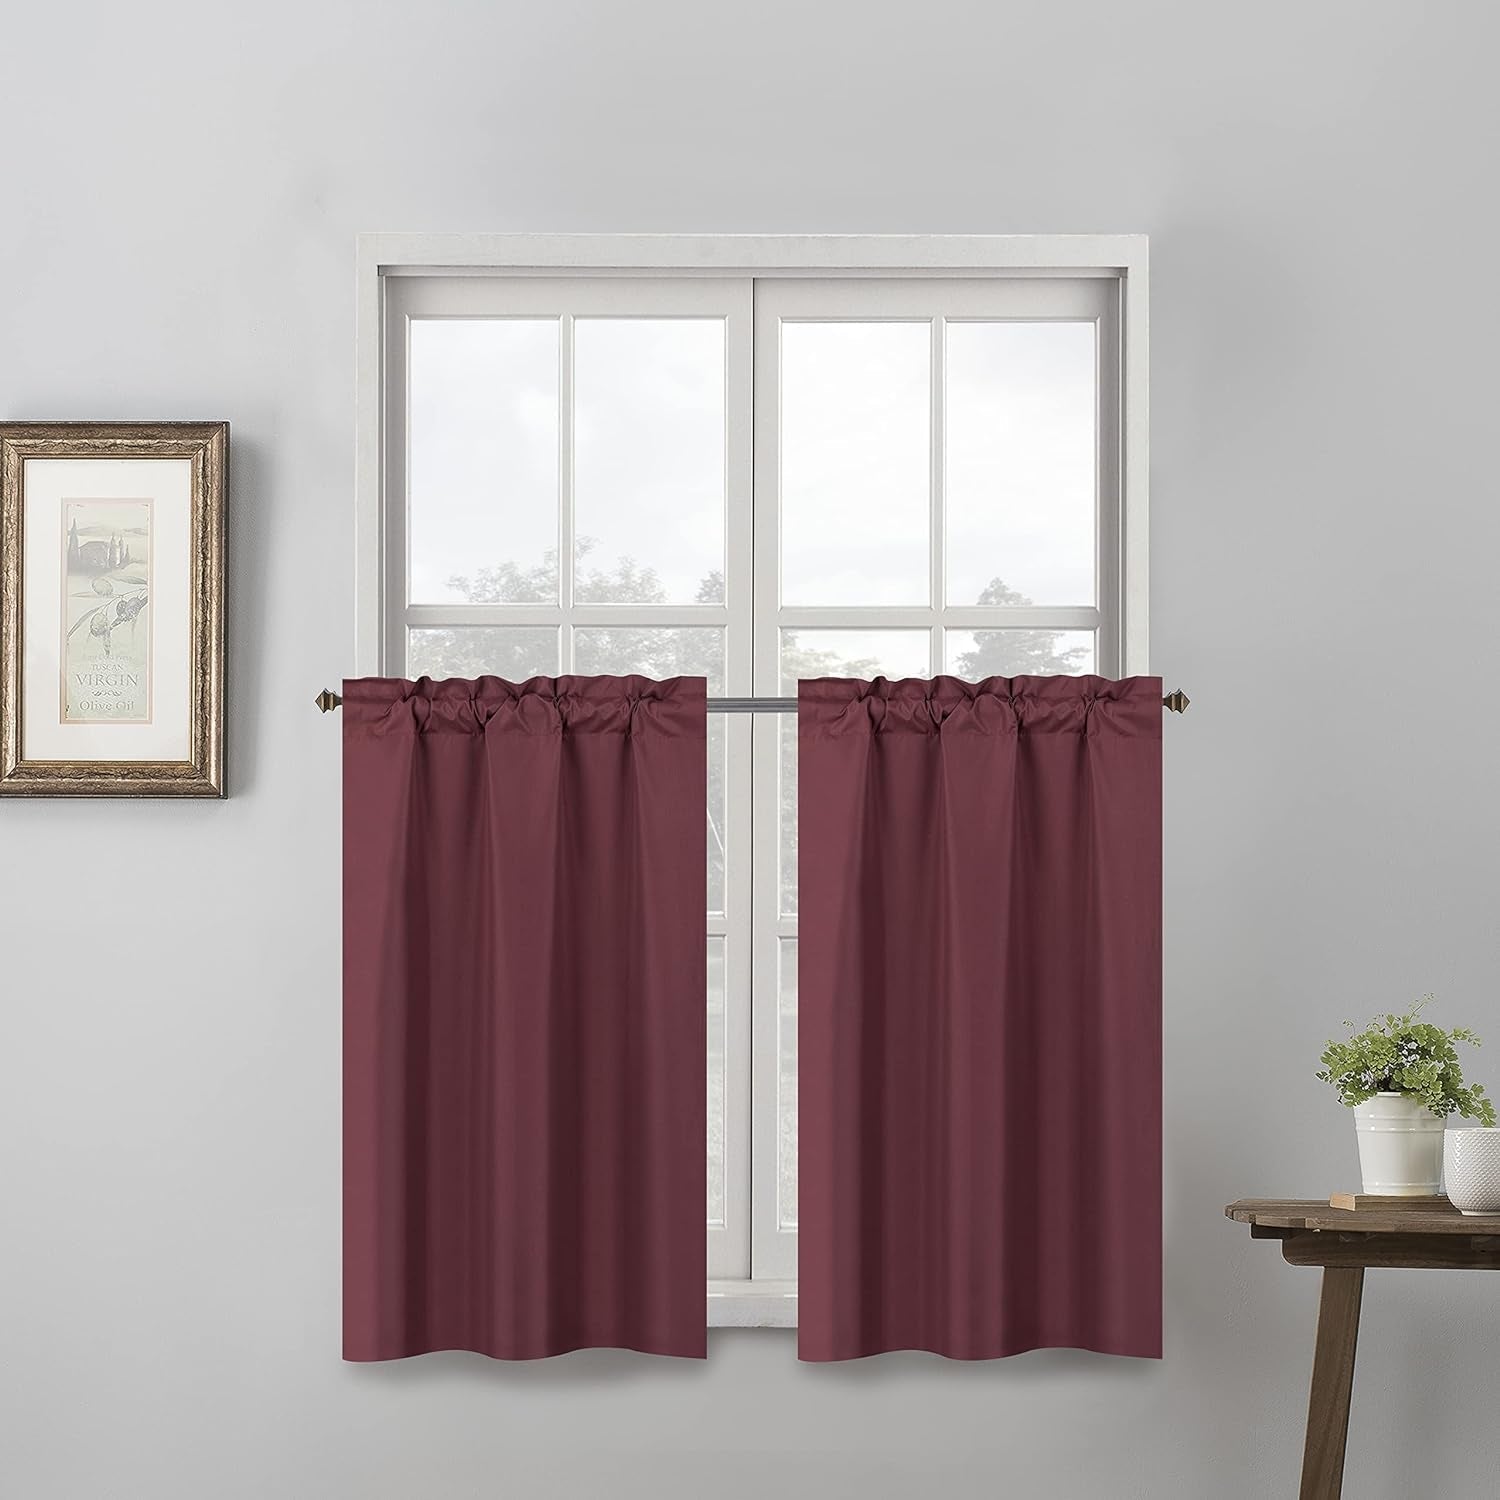 3 Piece Window Curtain Set Tiers and Valance, Solid Blackout for Kitchen Living Room; Thermal Insulated Panel Room Darkening Drape (Burgundy)